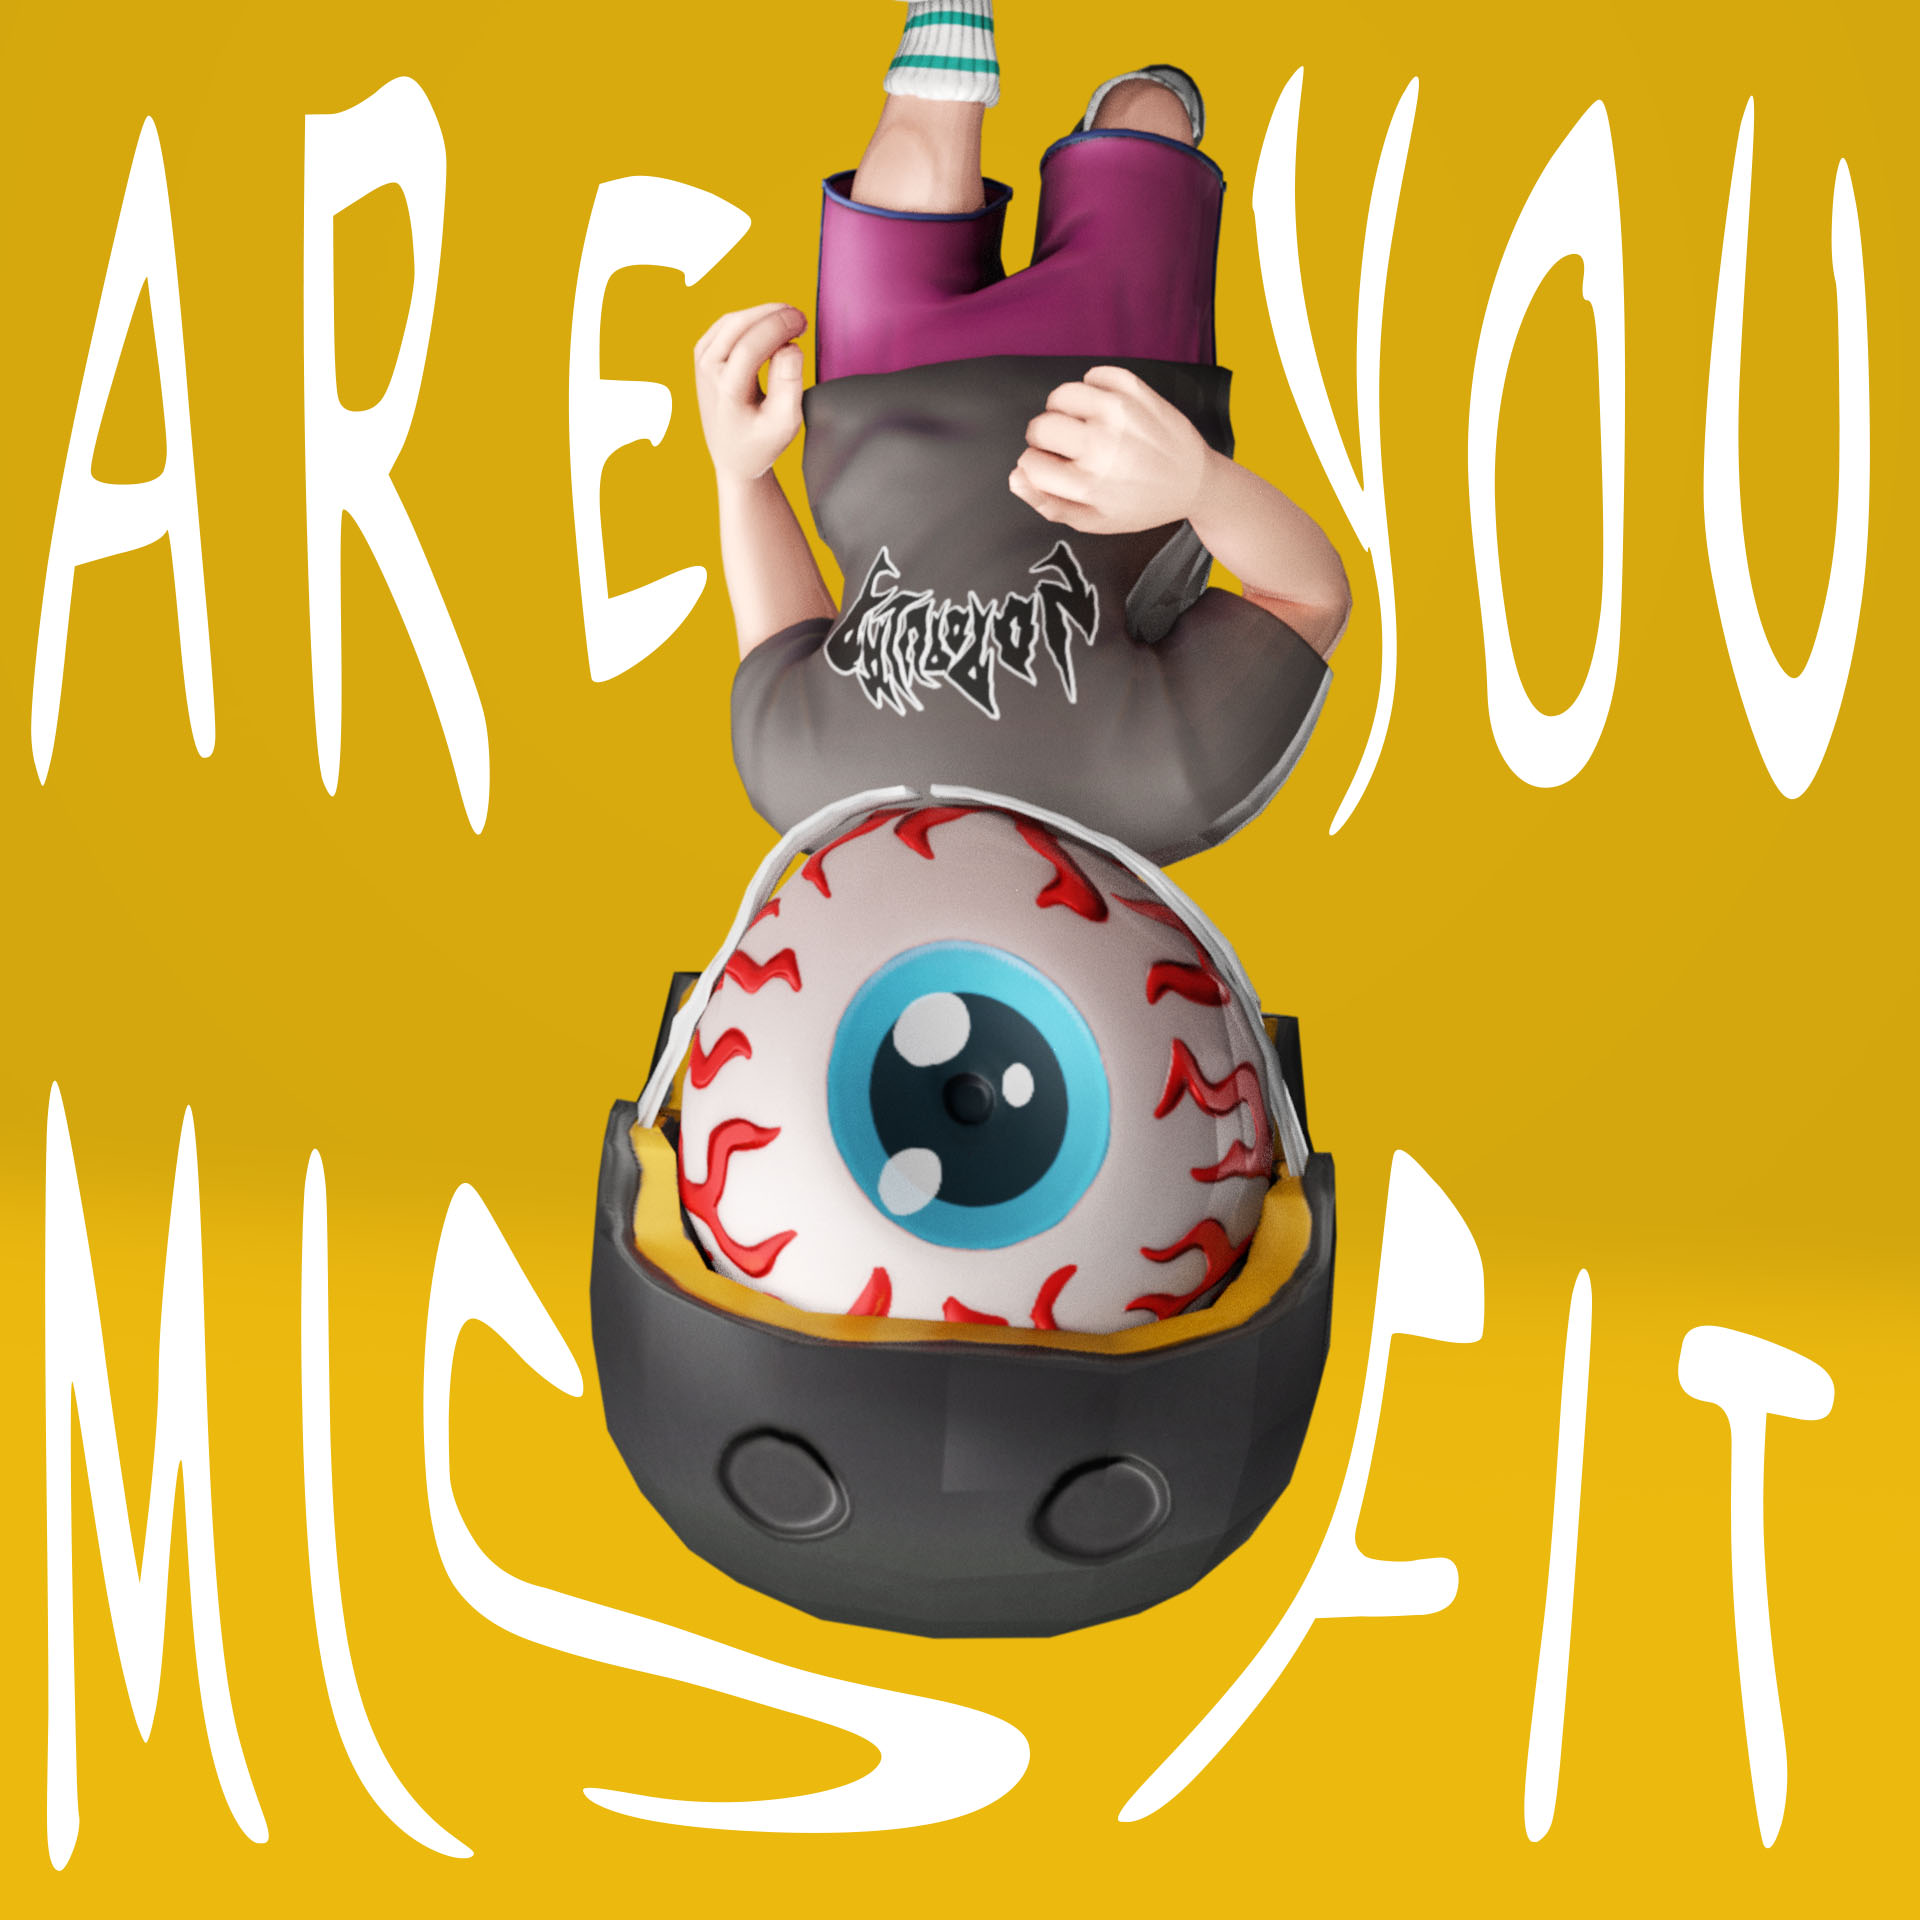 Eye, Are you a Misfit?